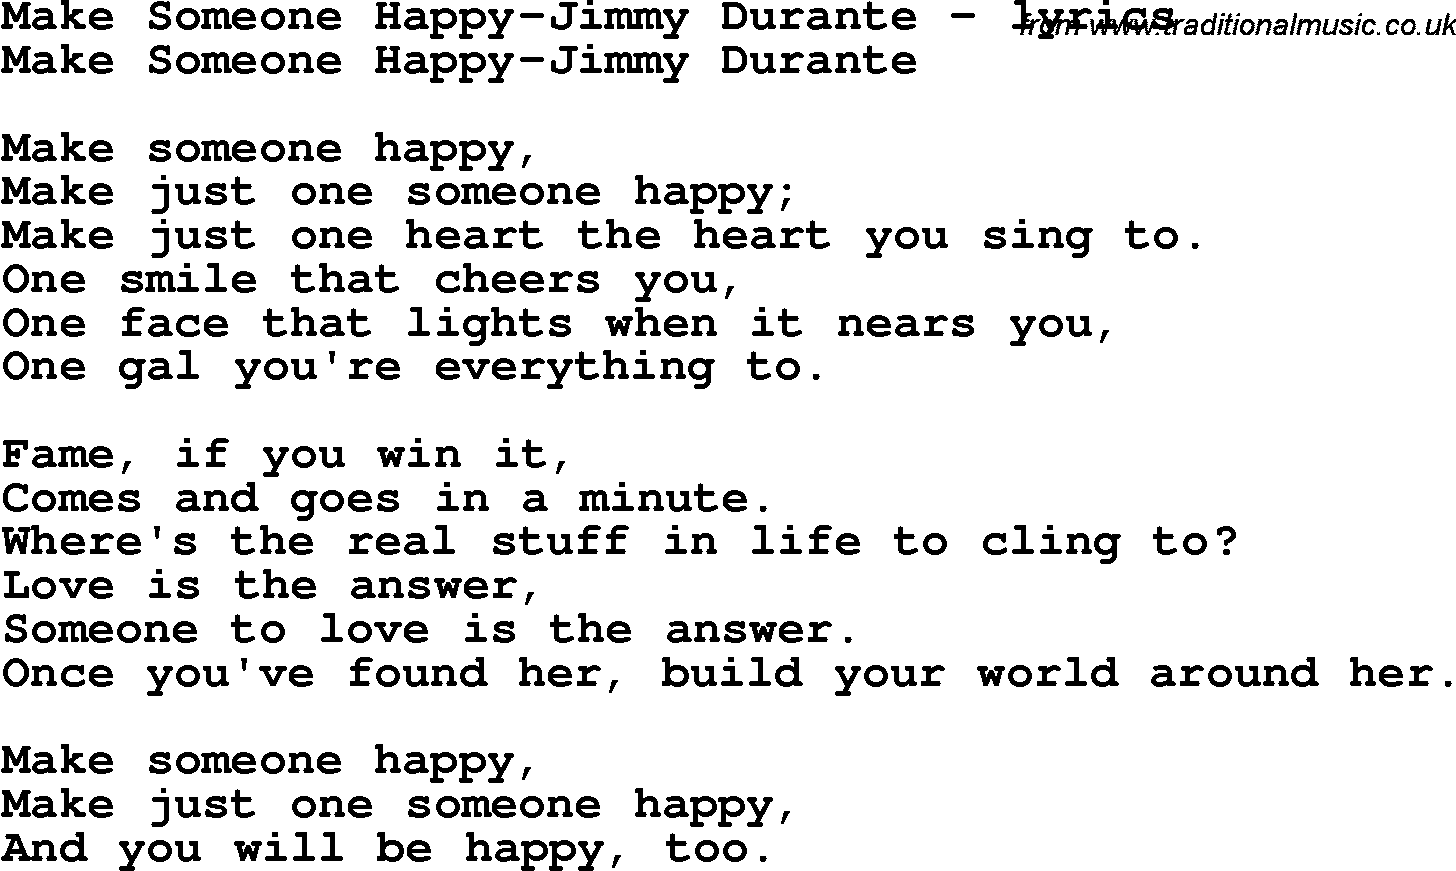 Love Song Lyrics for: Make Someone Happy-Jimmy Durante